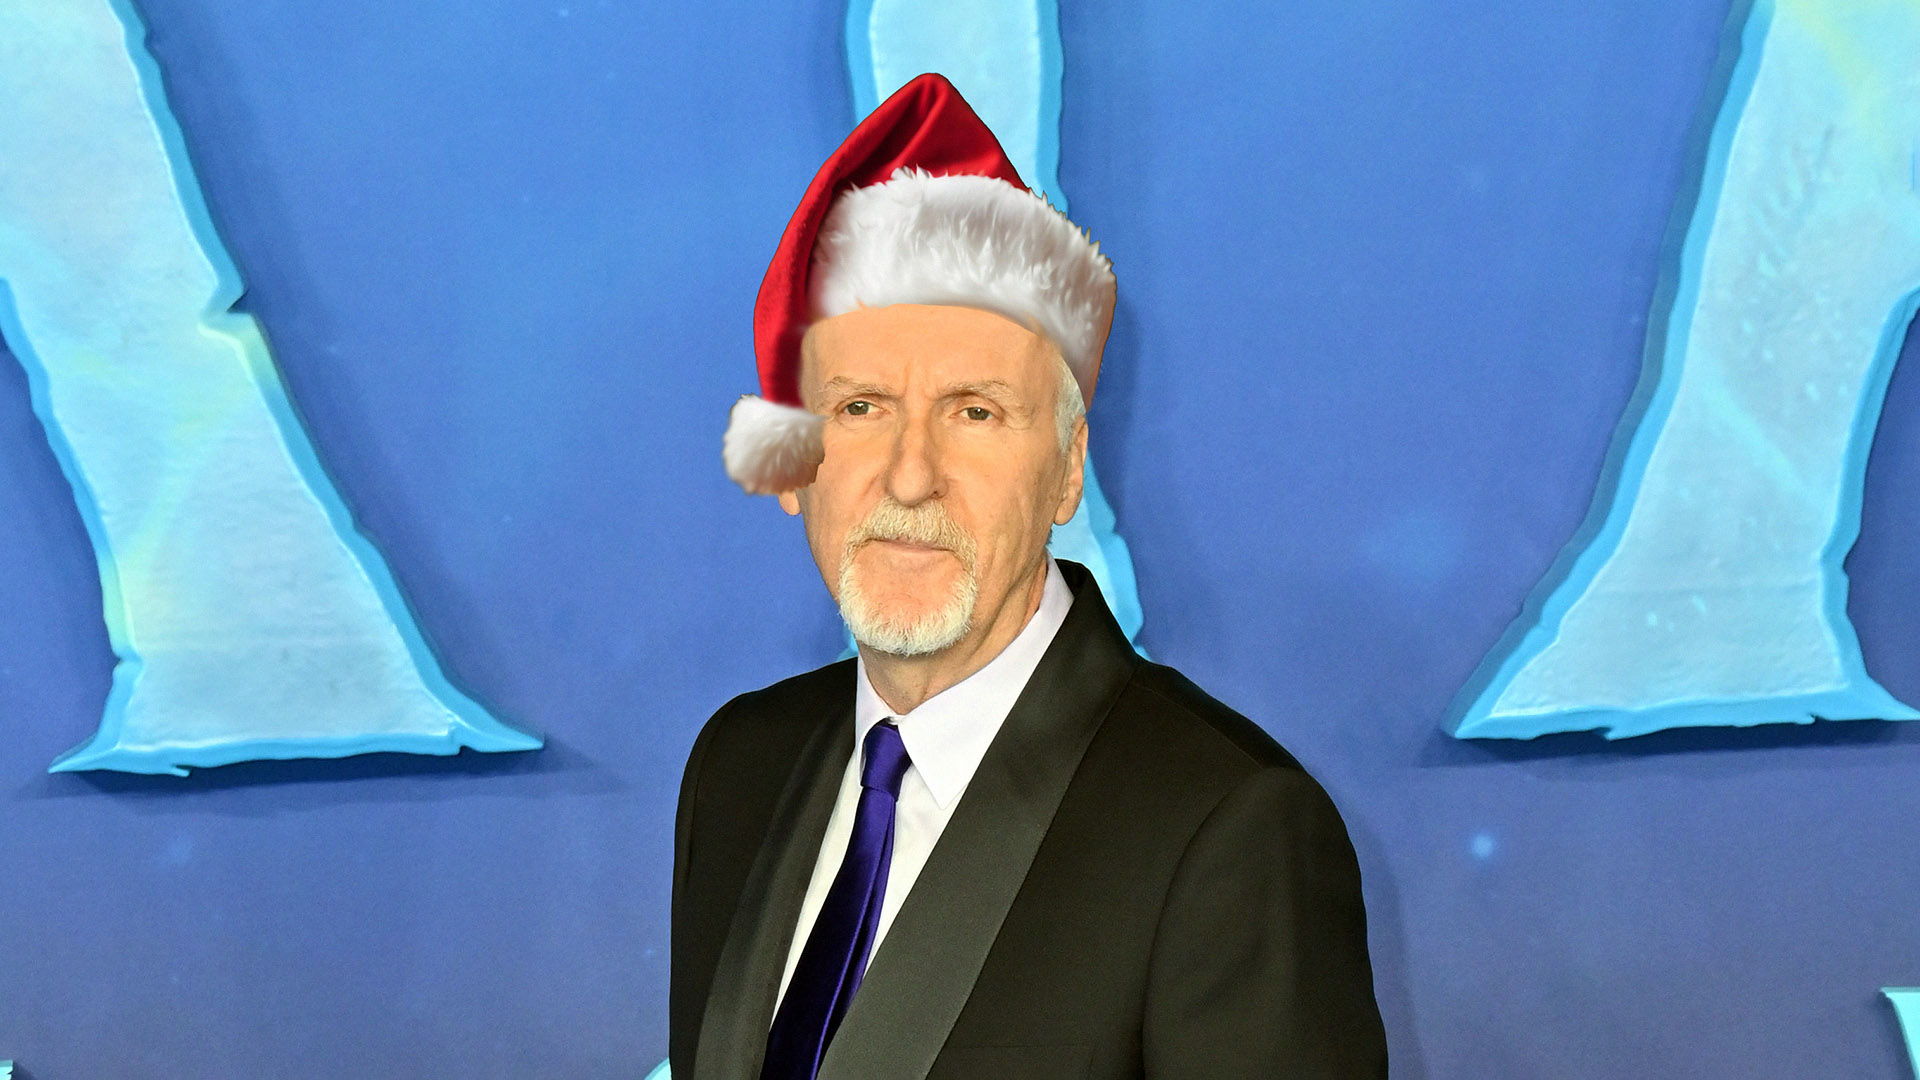 Do You Believe in Santa? James Cameron's Christmas 2025 Present Will Convince You